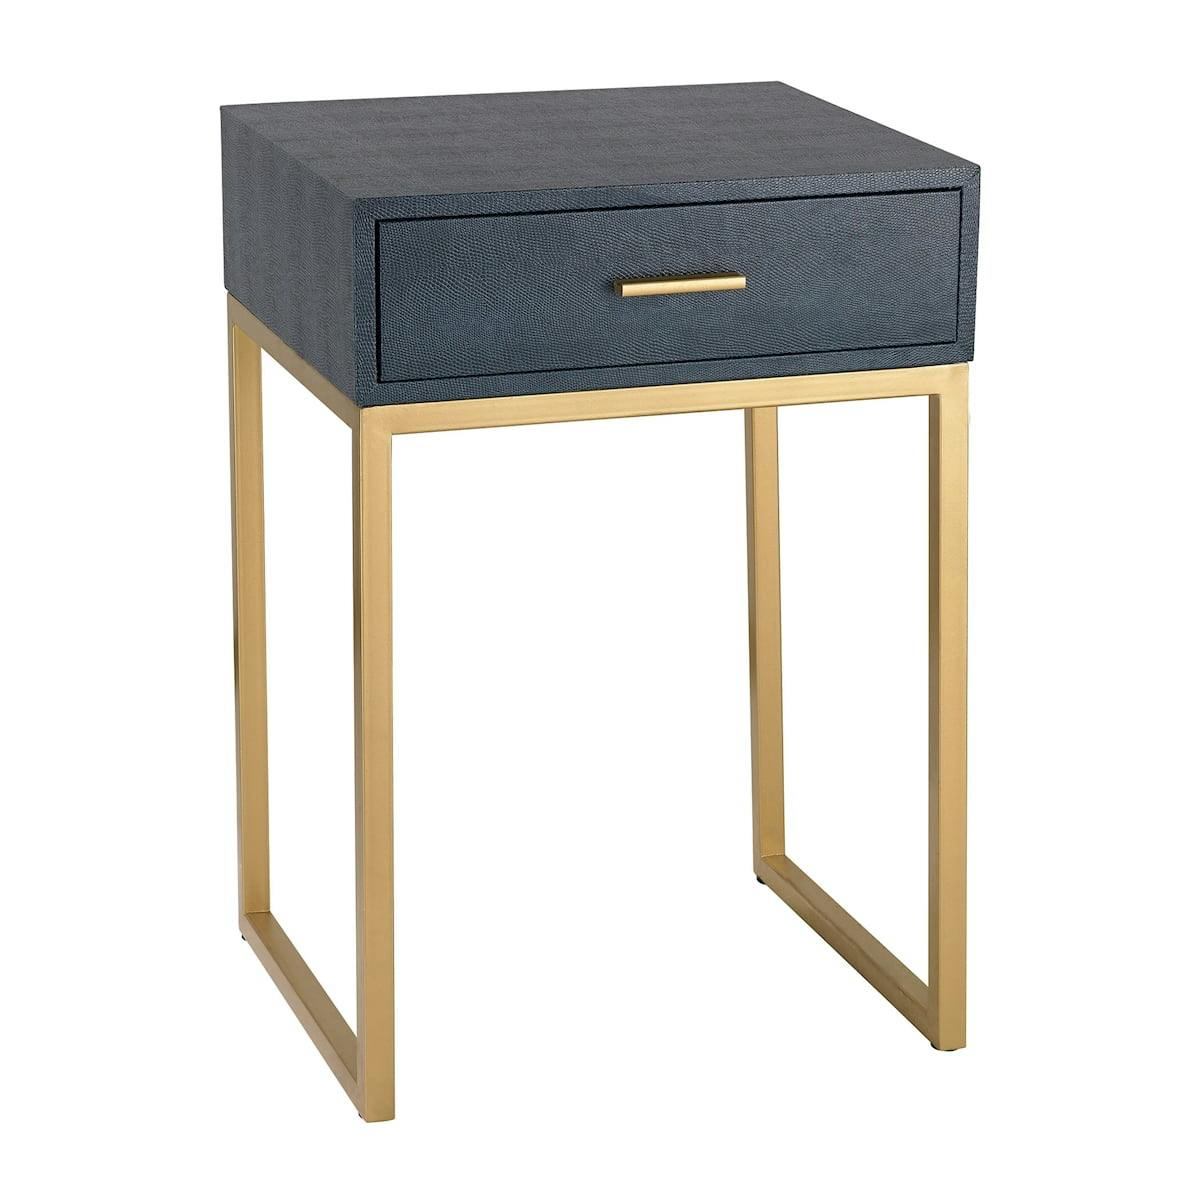 Sleek Navy and Gold Square Side Table with Storage Drawer